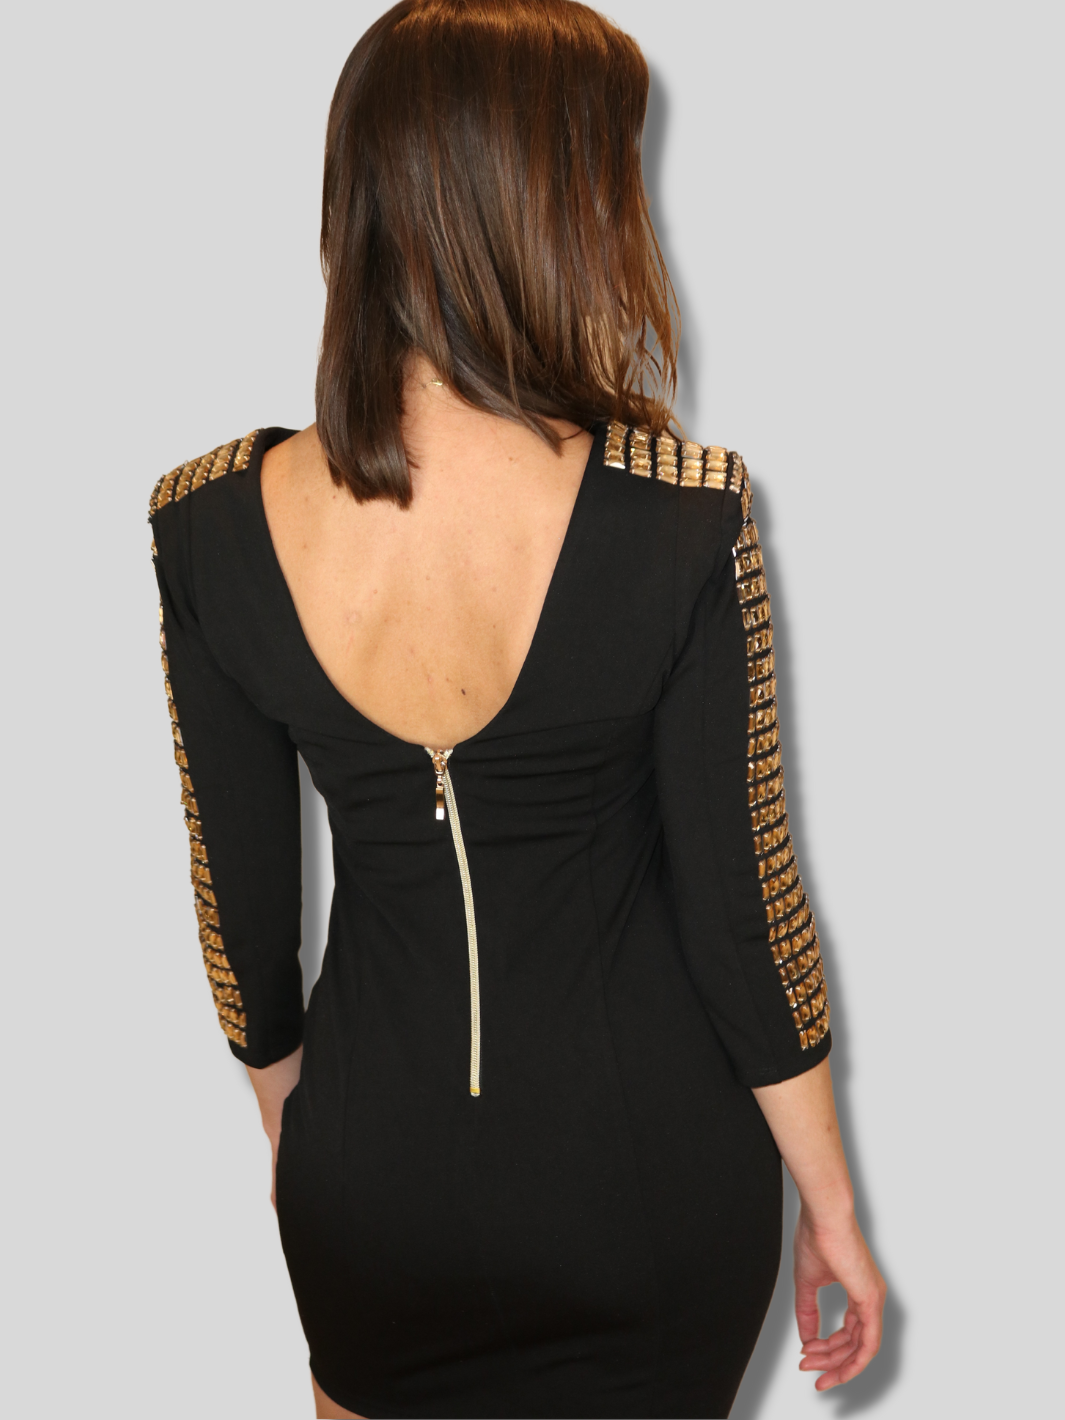 4ever Stunning Deluxe Premium black midi dress with gold rhinestone jeweled arms and chunky gold back zip fastening. model has her back to the camera, the plunging back is fastened by a chunky gold exposed zip. 